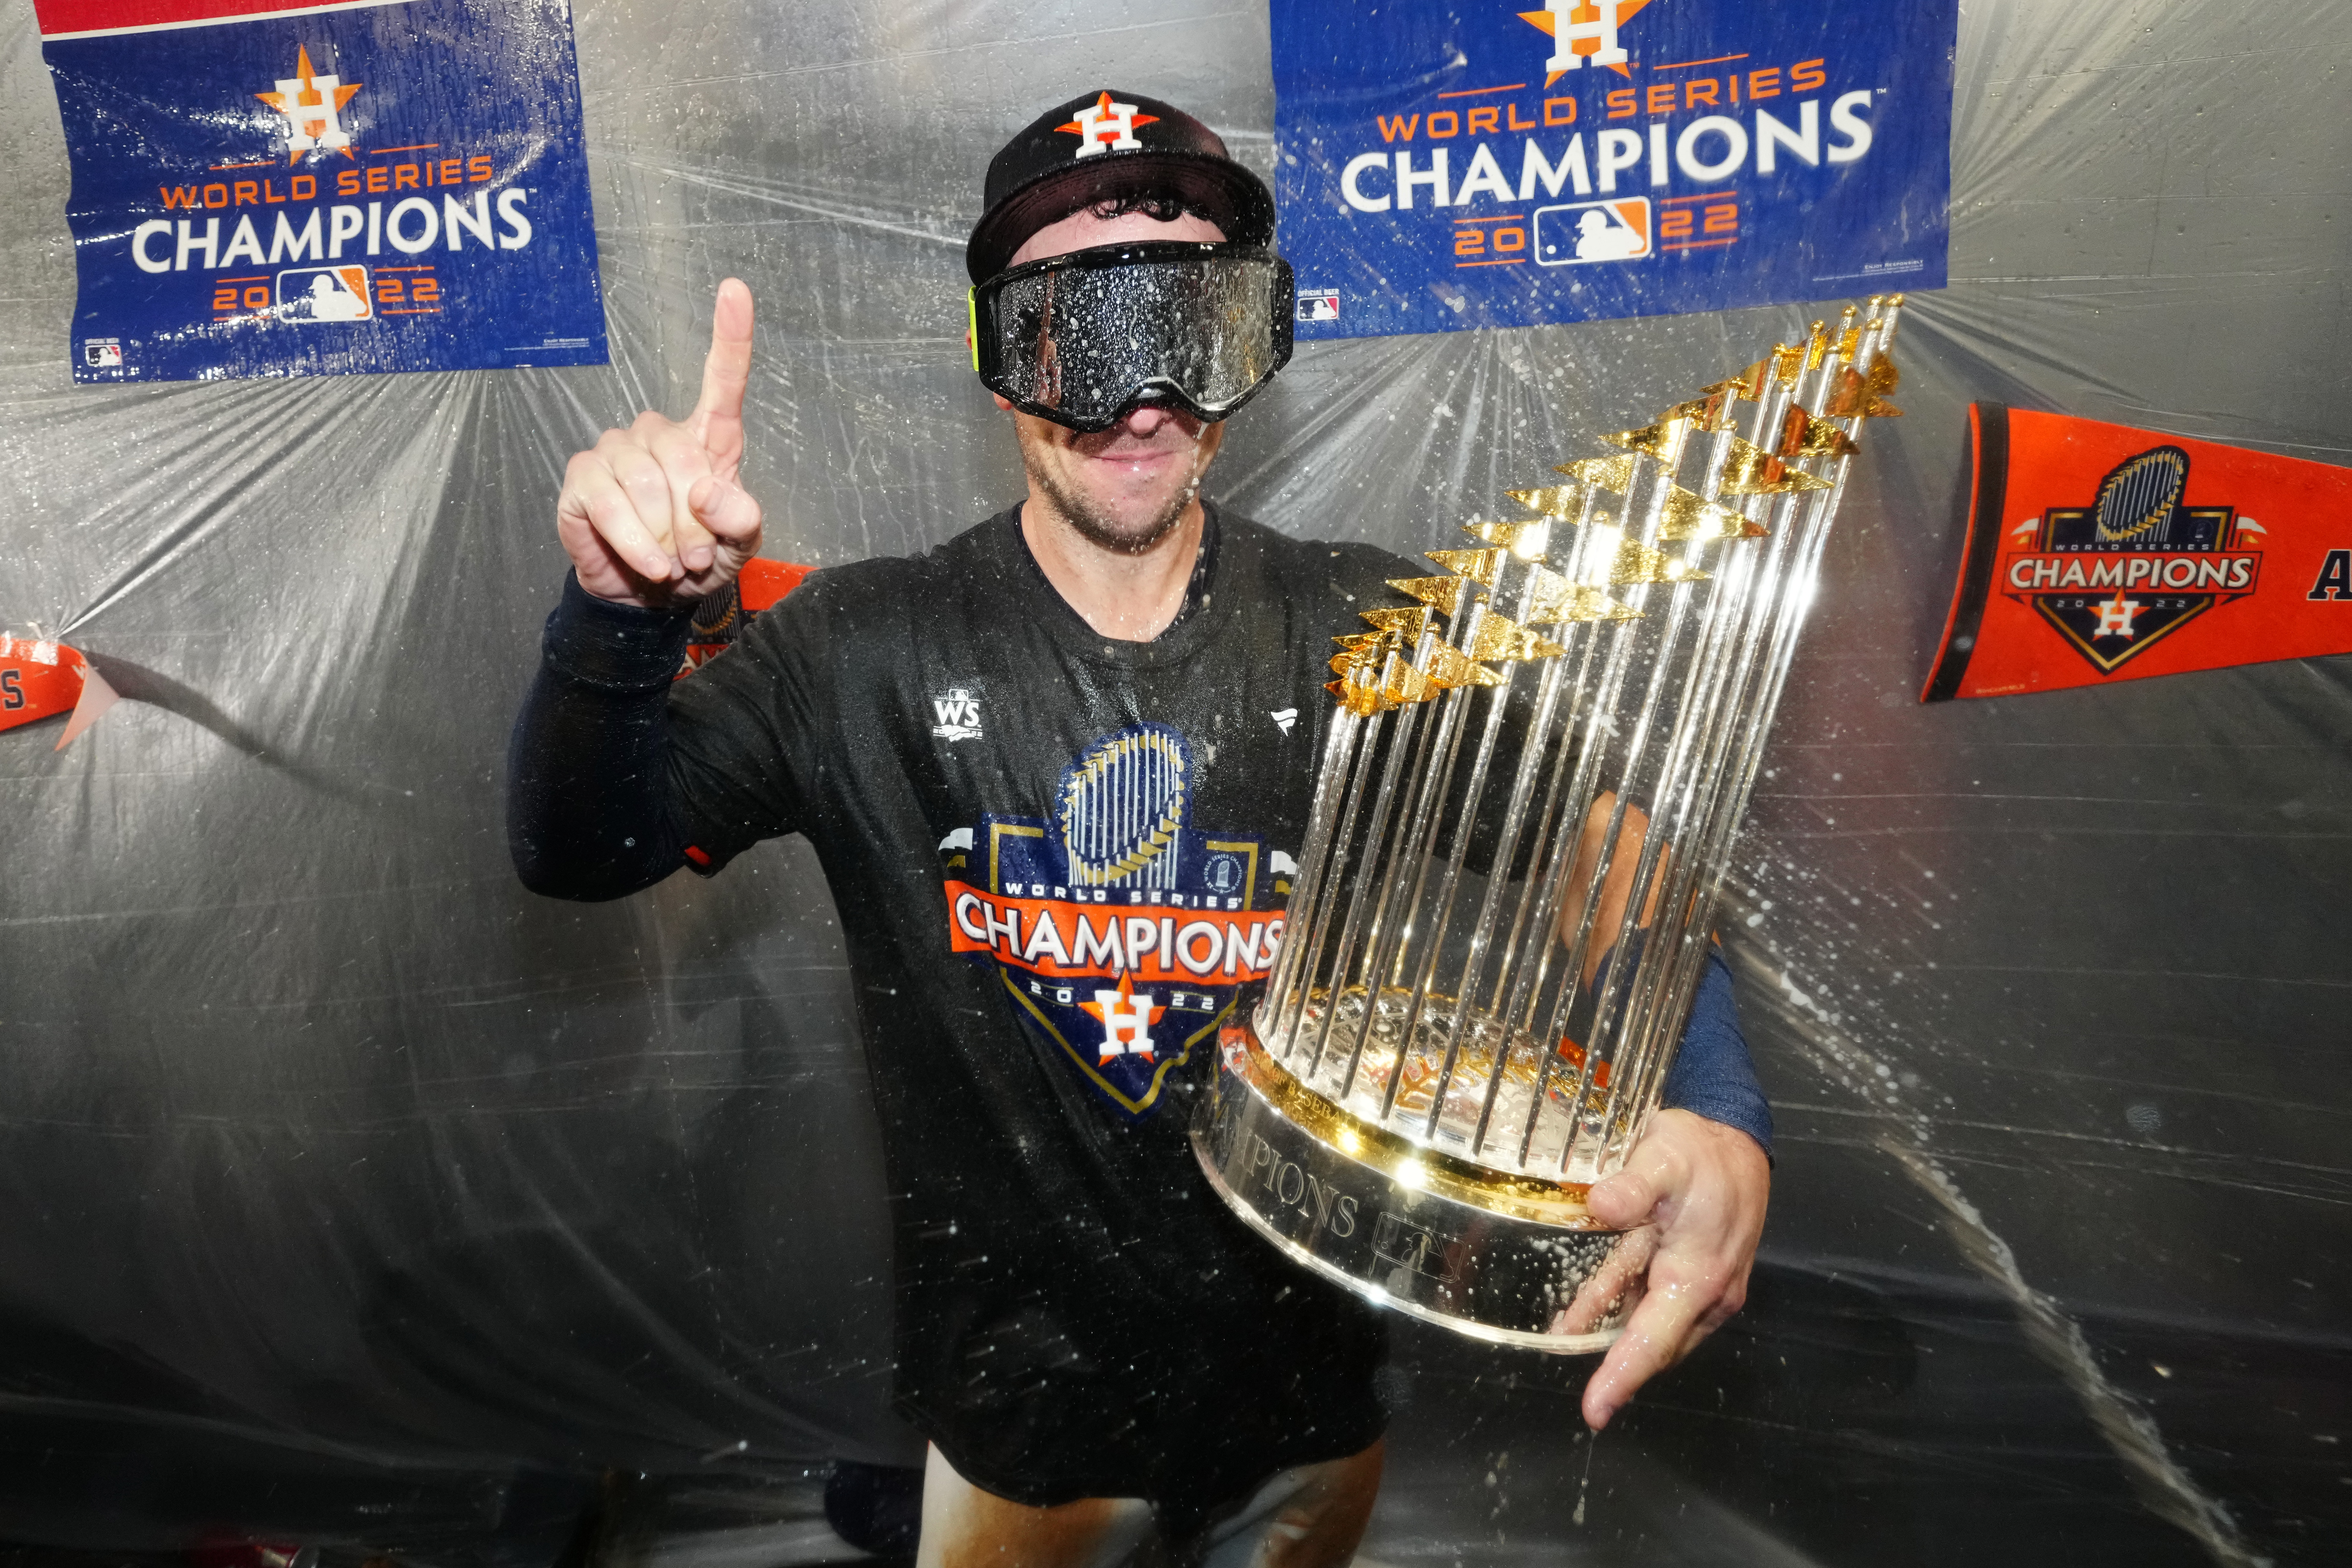 Alex Bregman of the Houston Astros celebrate in the clubhouse after the Astros defeated the Phillies, 4-1, in Game 6 of the 2022 World Series between the Philadelphia Phillies and the Houston Astros at Minute Maid Park on Saturday, November 5, 2022 in Houston, Texas.